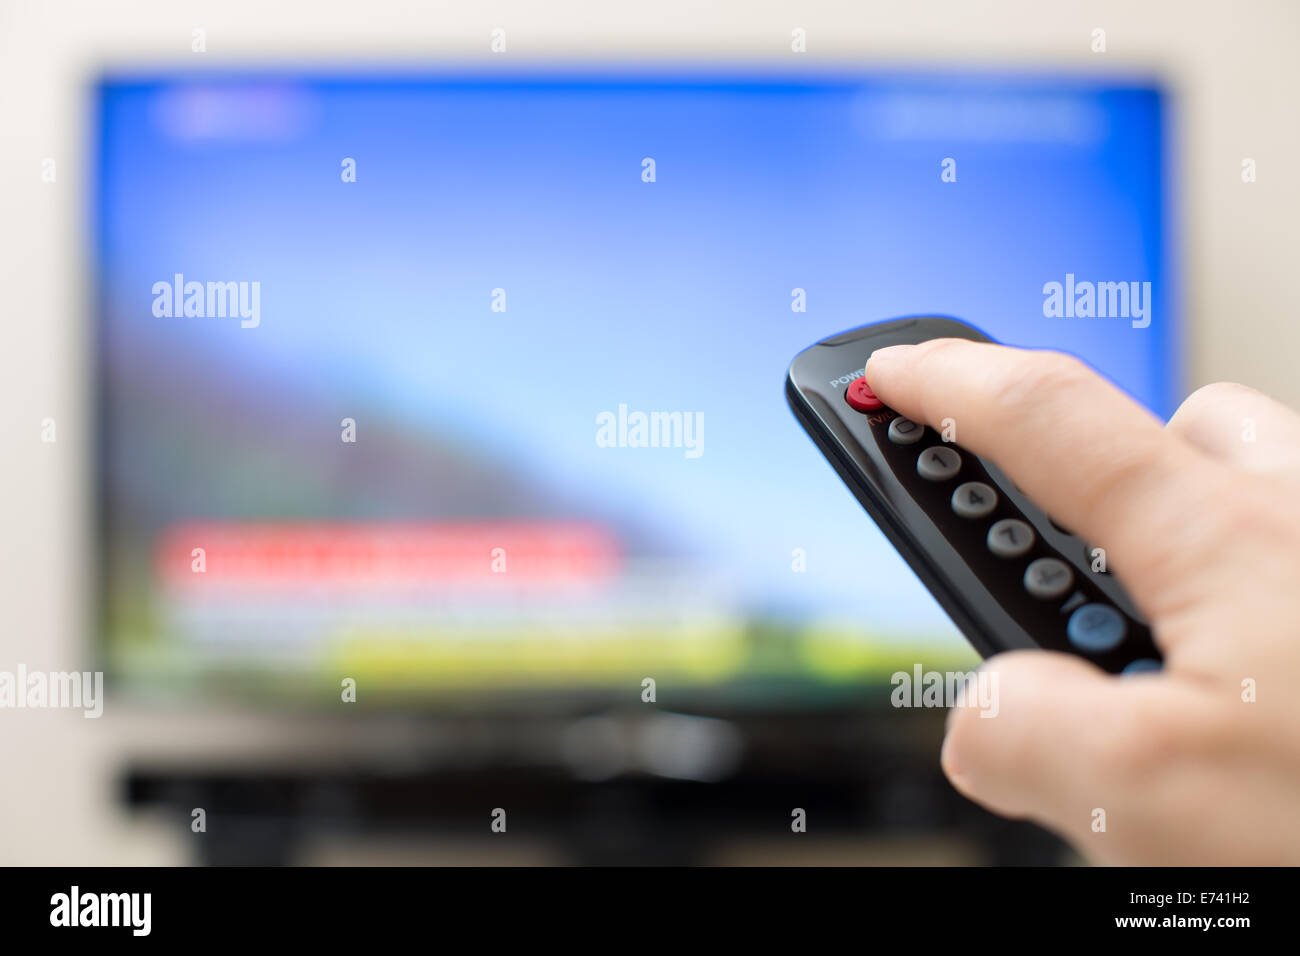 Power button pressing on TV remote control Stock Photo